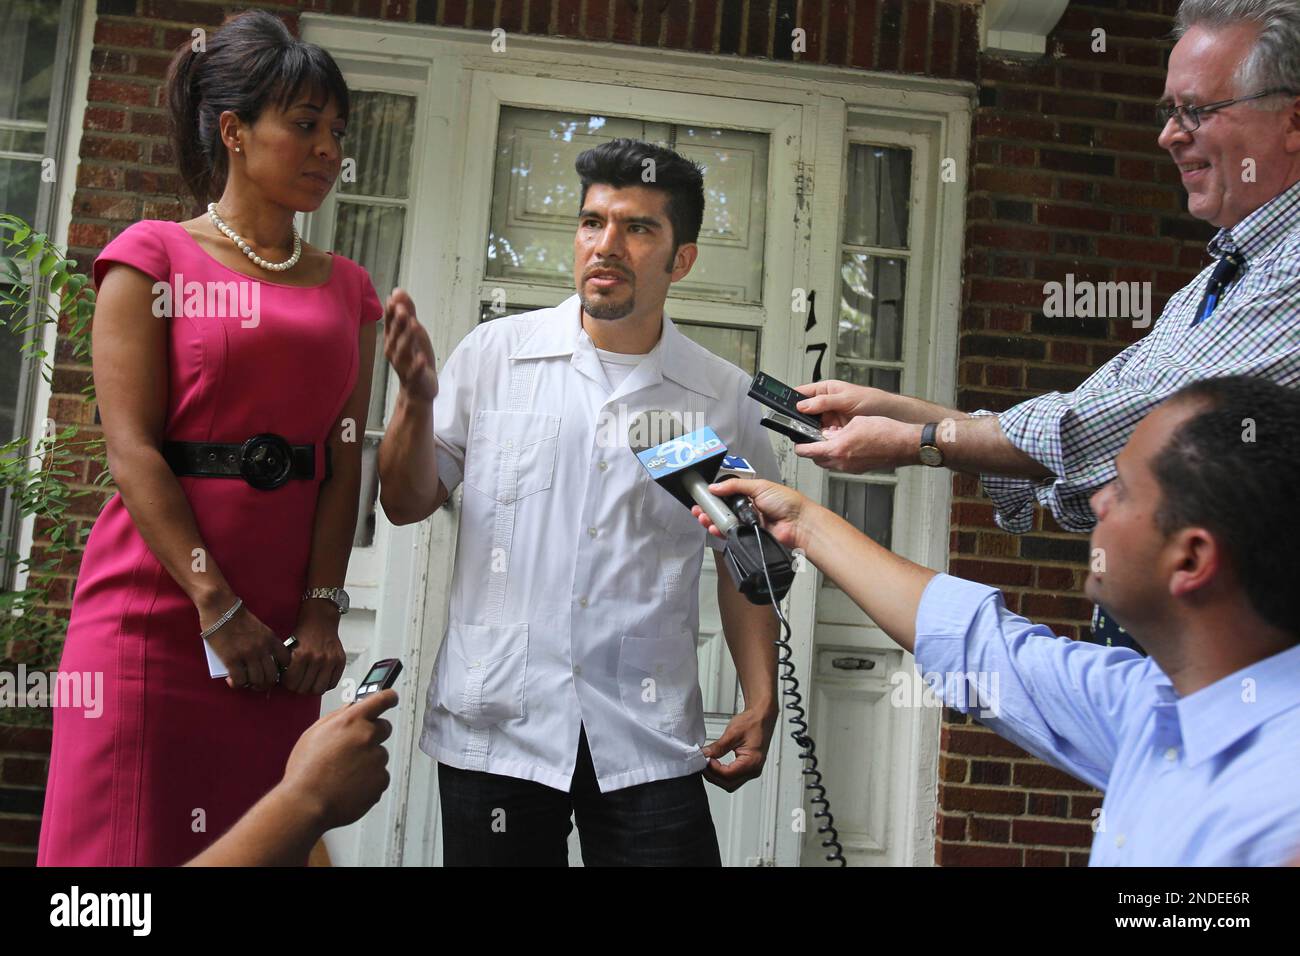 Waldo Mariscal, center, son of accused spy Vicky Pelaez, speaks to the media with his attorney Genesis Peduto, left, on the front porch of his family home in Yonkers, N.Y., Friday, July 9, 2010. (AP Photo/Seth Wenig) Foto Stock